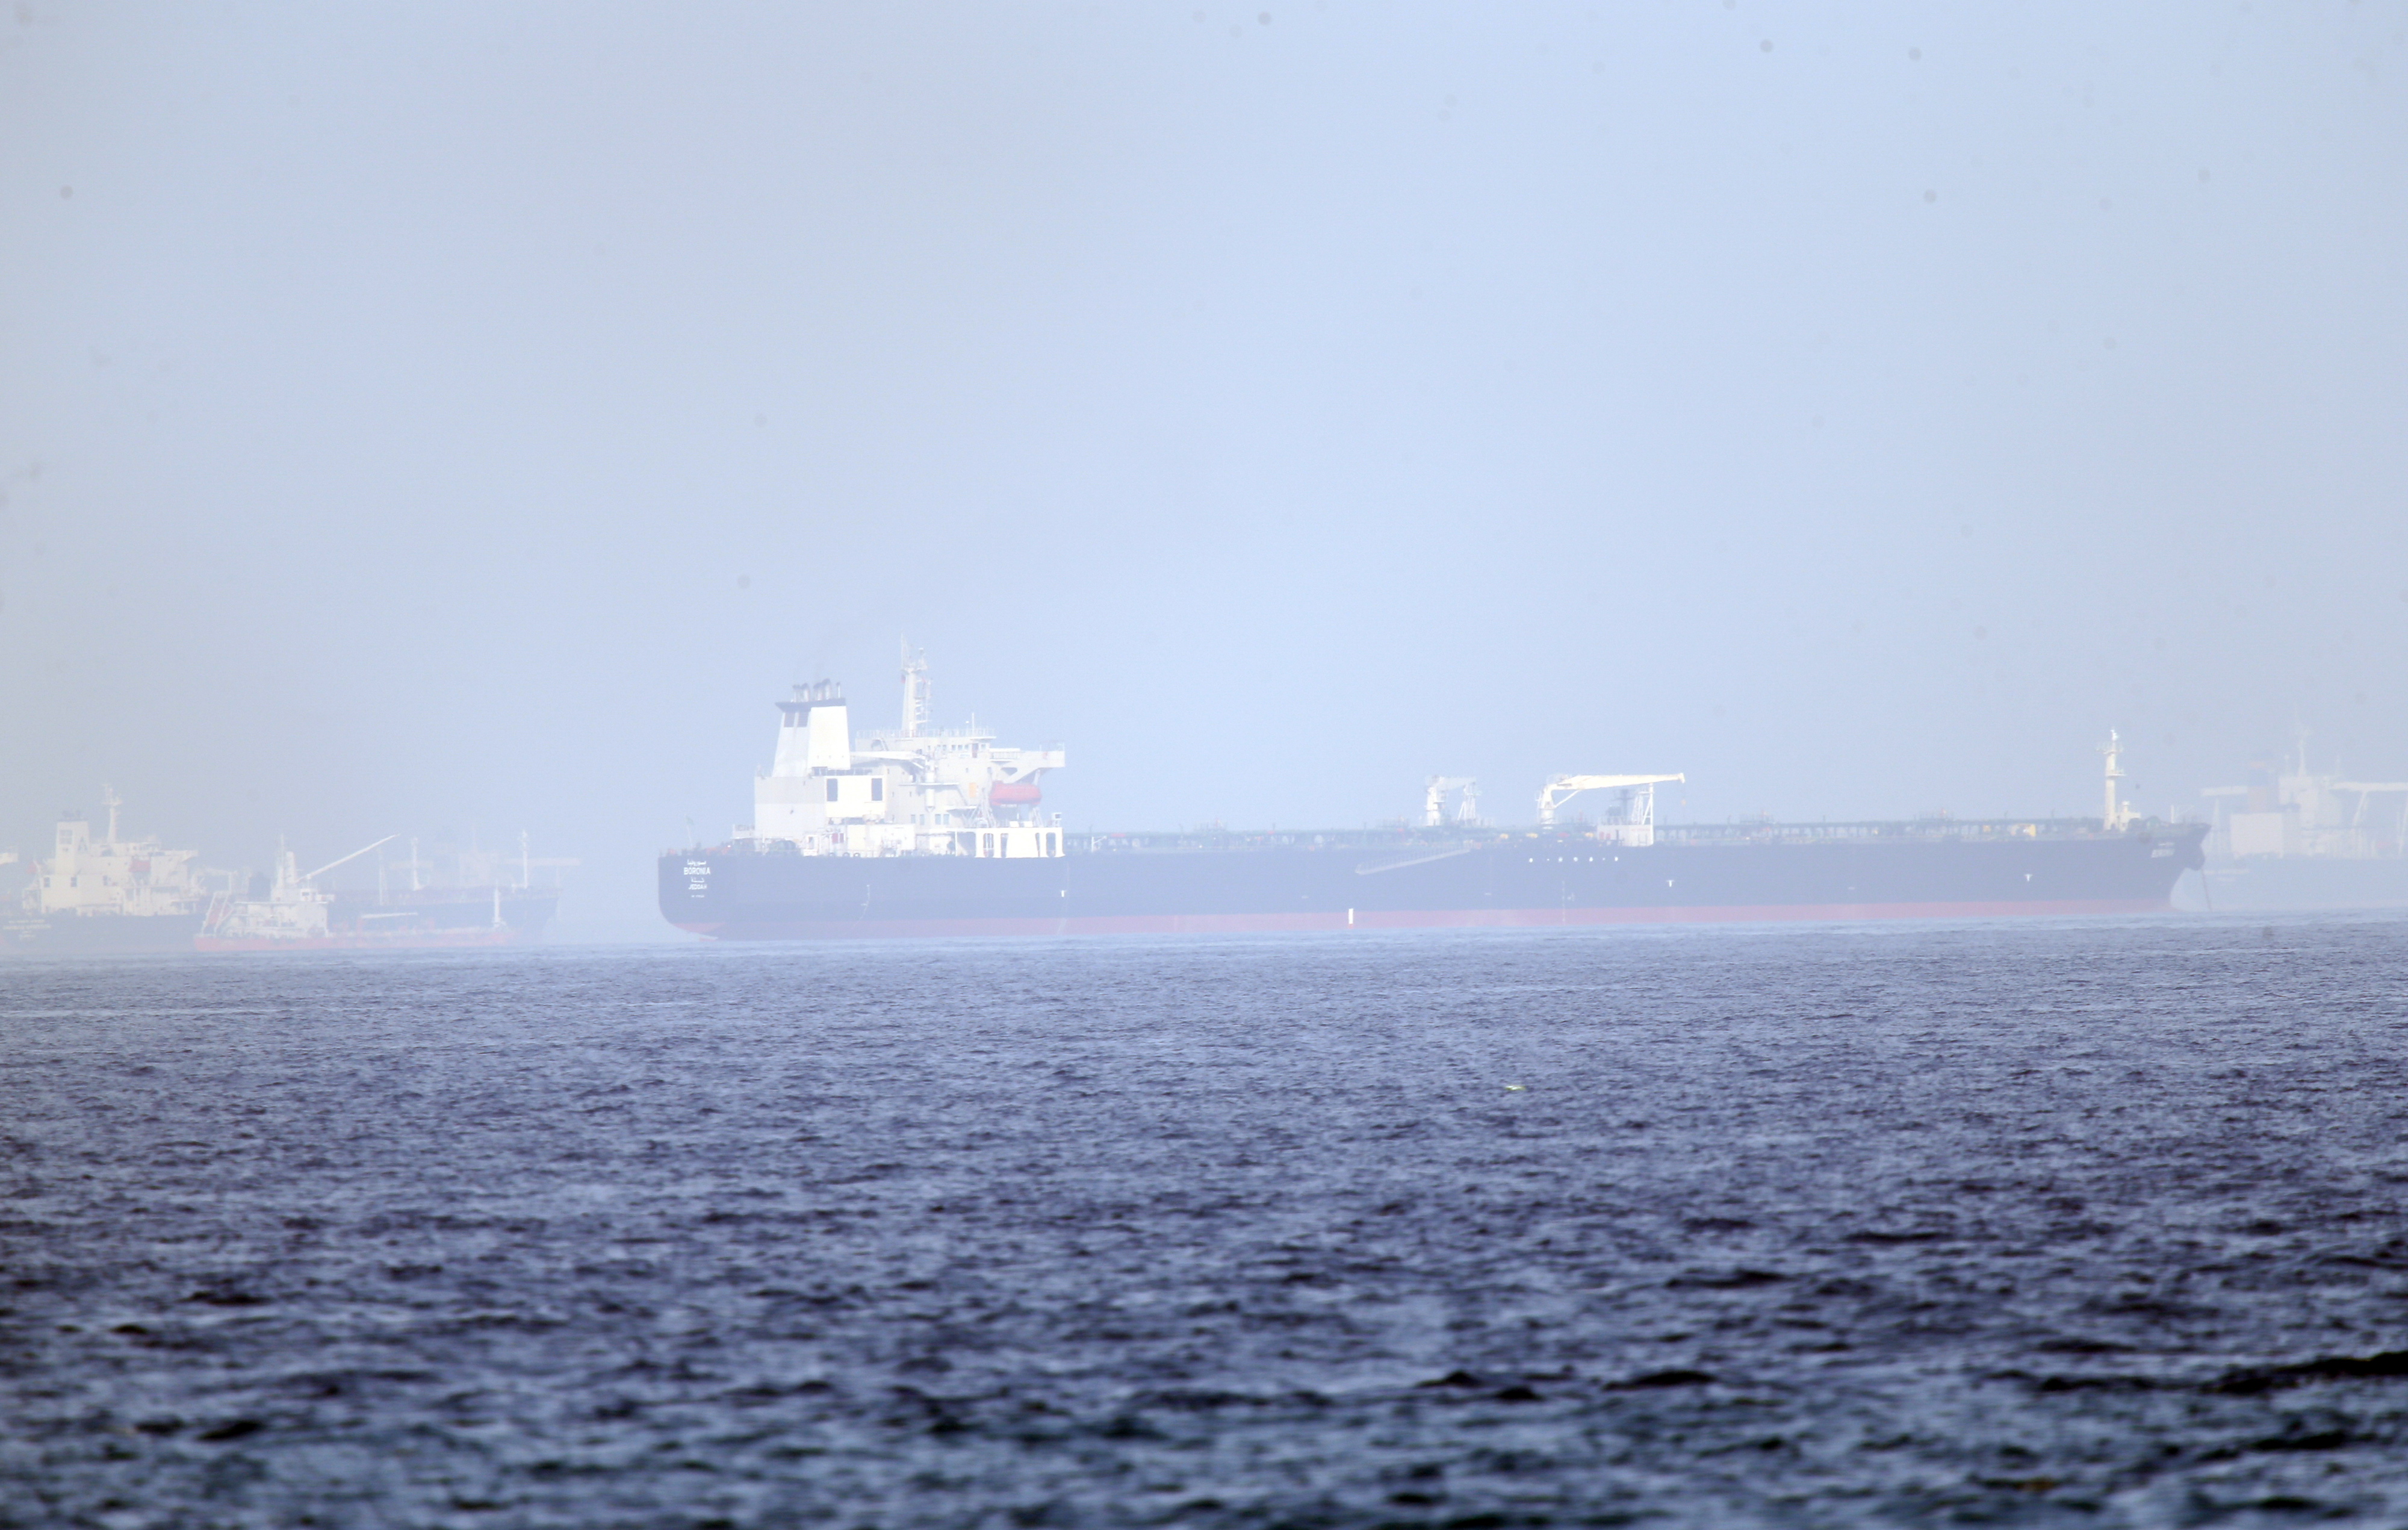 epa07650149  A general view for ships sailing at Fujairah port at Fujairah coast, United Arab Emirates, 15 June 2019. According to media reports, two oil tankers, Japan's Kokuka Courageous and Norway's Front Altair, were damaged in the Gulf of Oman after allegedly being attacked in the early morning of 13 June between the UAE and Iran. Fujairah port authorities ordered the tanker Japan's Kokuka Courageous to anchor outside the Port to unload the dangerous material the vessel is carrying.  EPA/ALI HAIDER